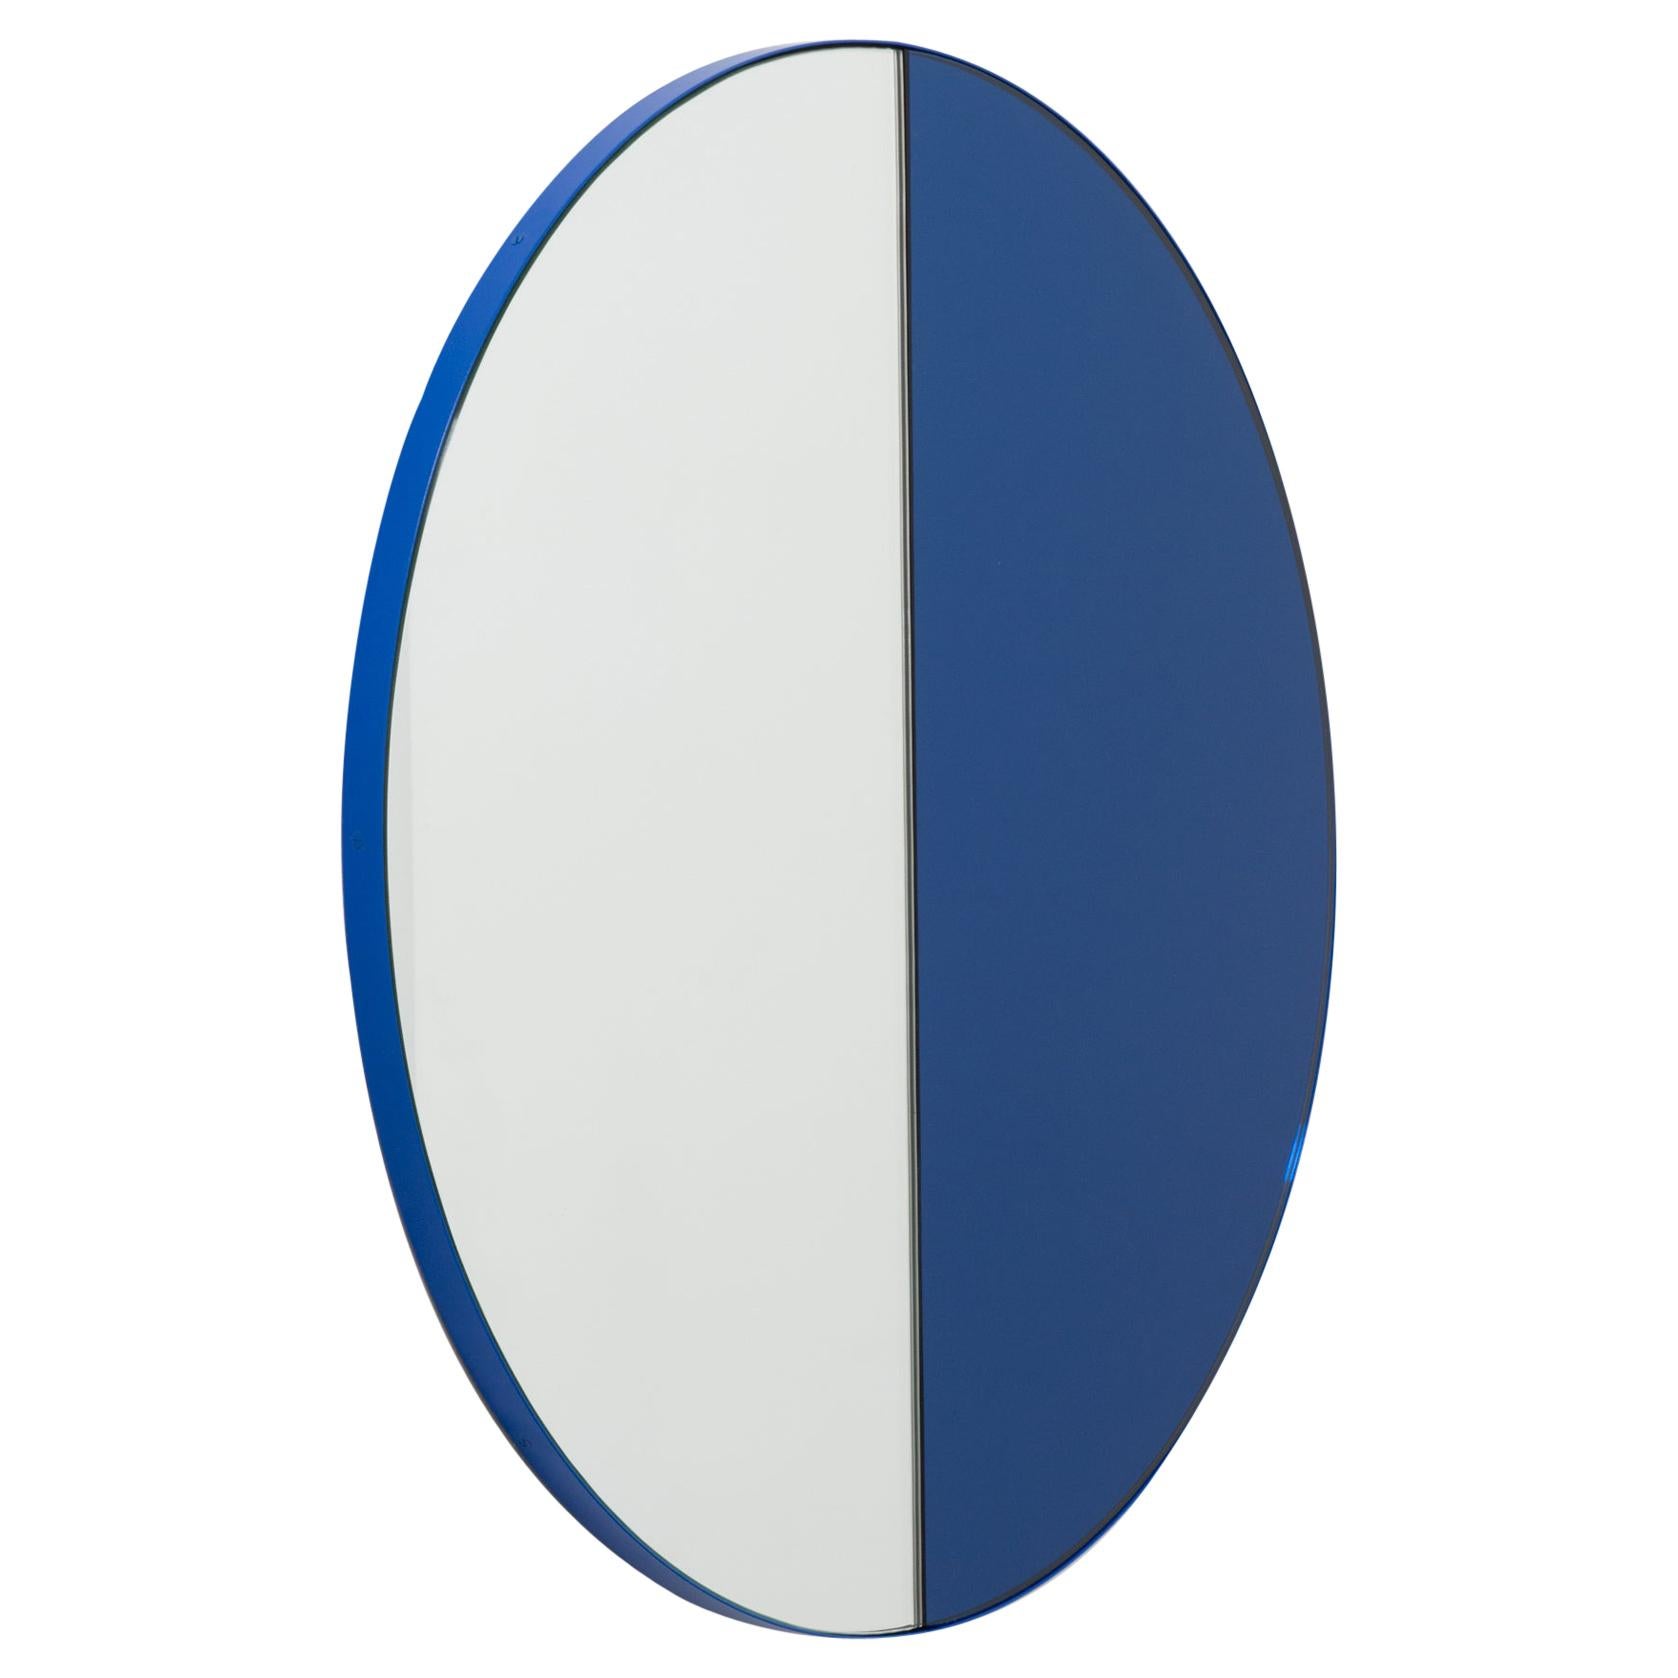 Orbis Dualis Mixed Blue Tinted Modern Round Mirror with Blue Frame, XL